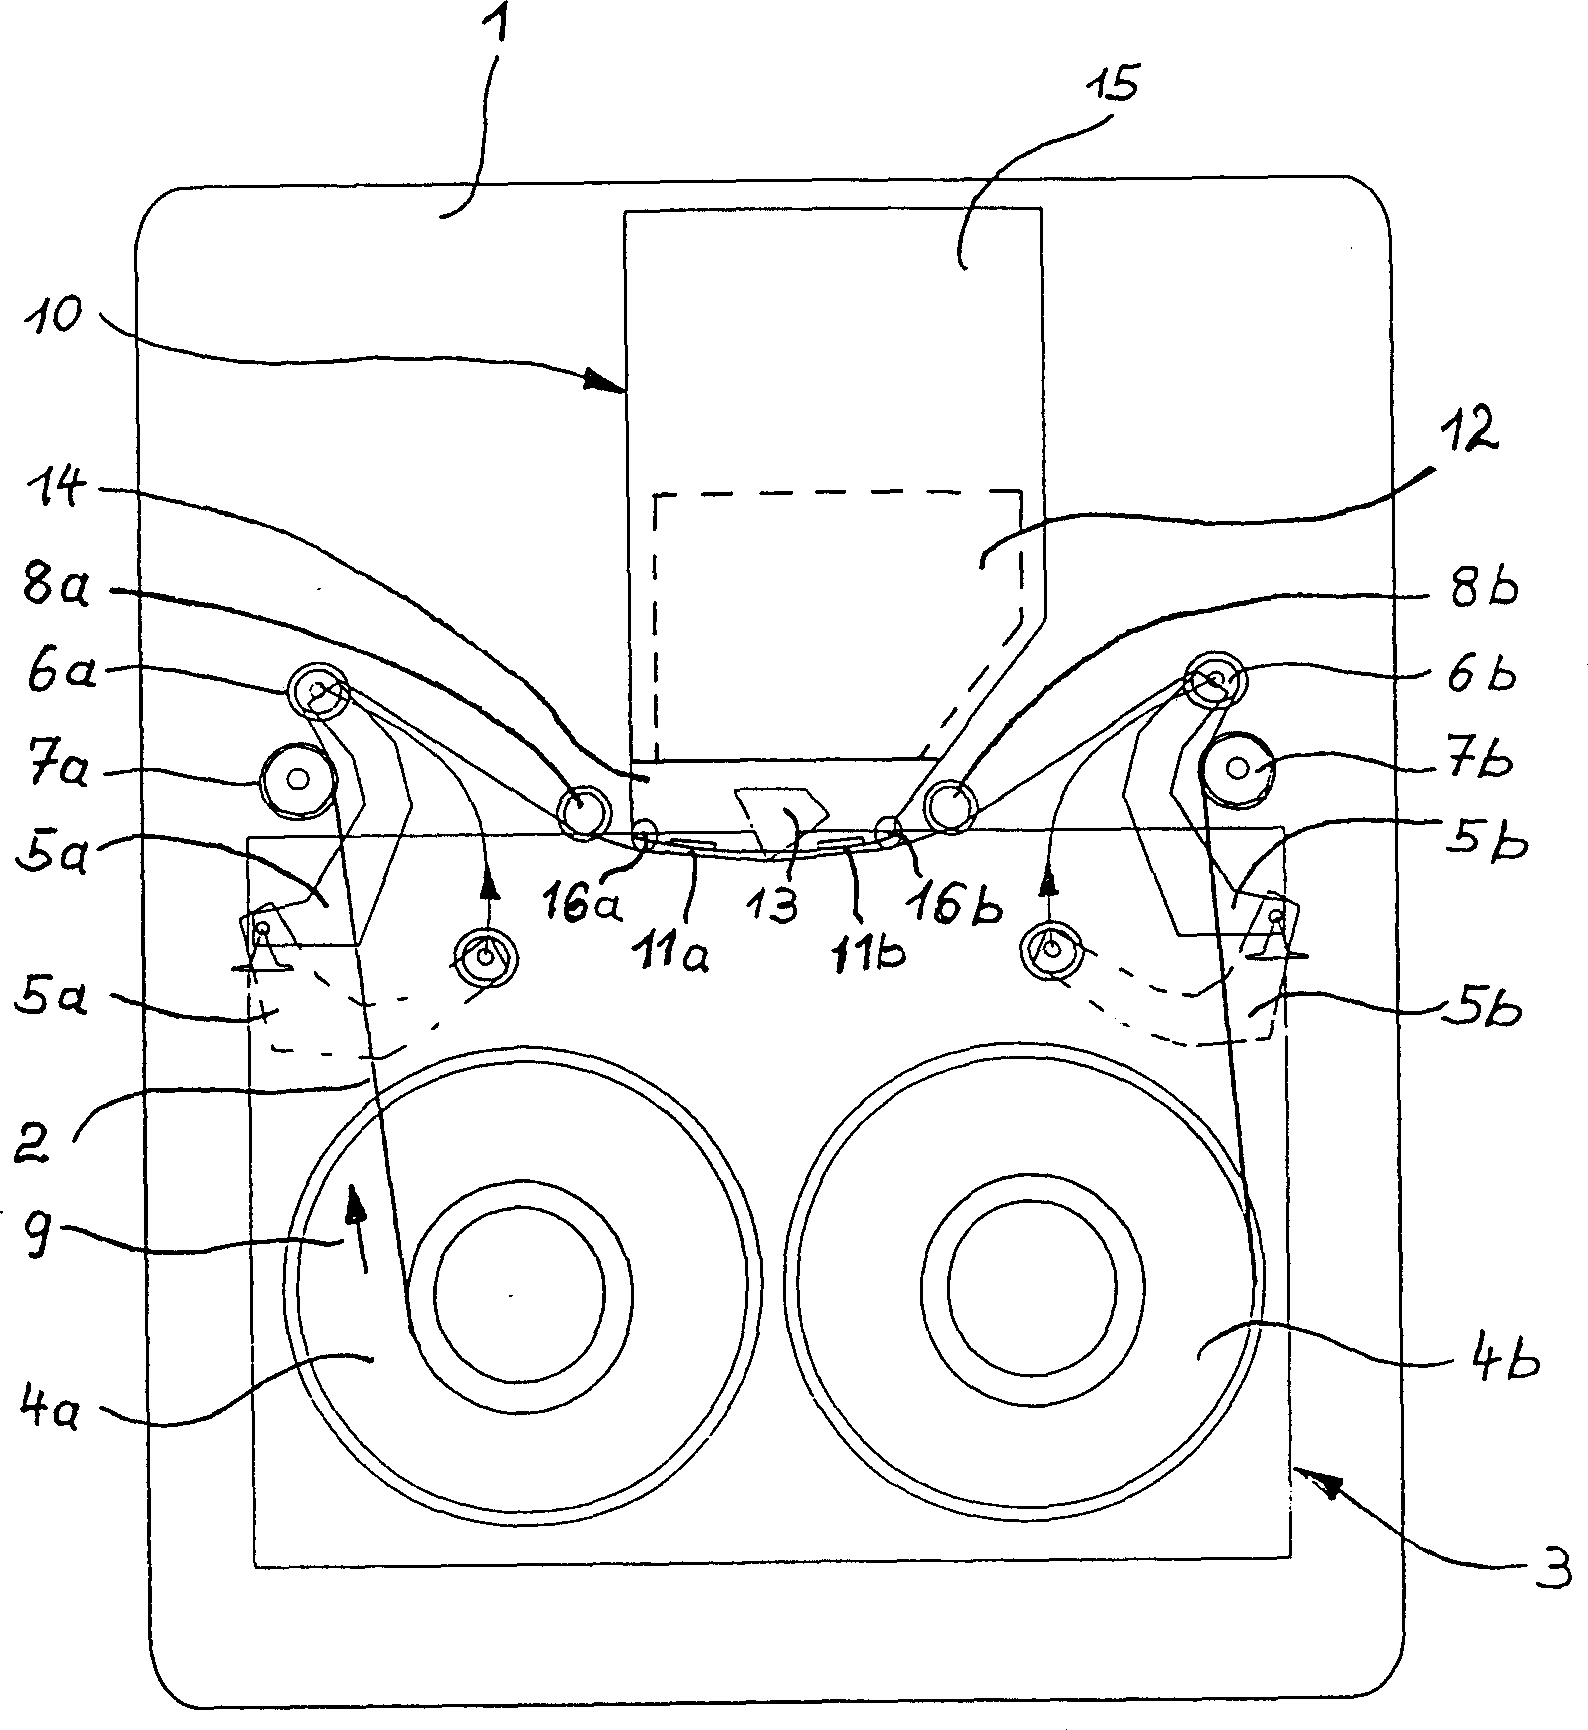 Reading-writing head assembly with multiple magnetic track guided by integrated magnetic tape